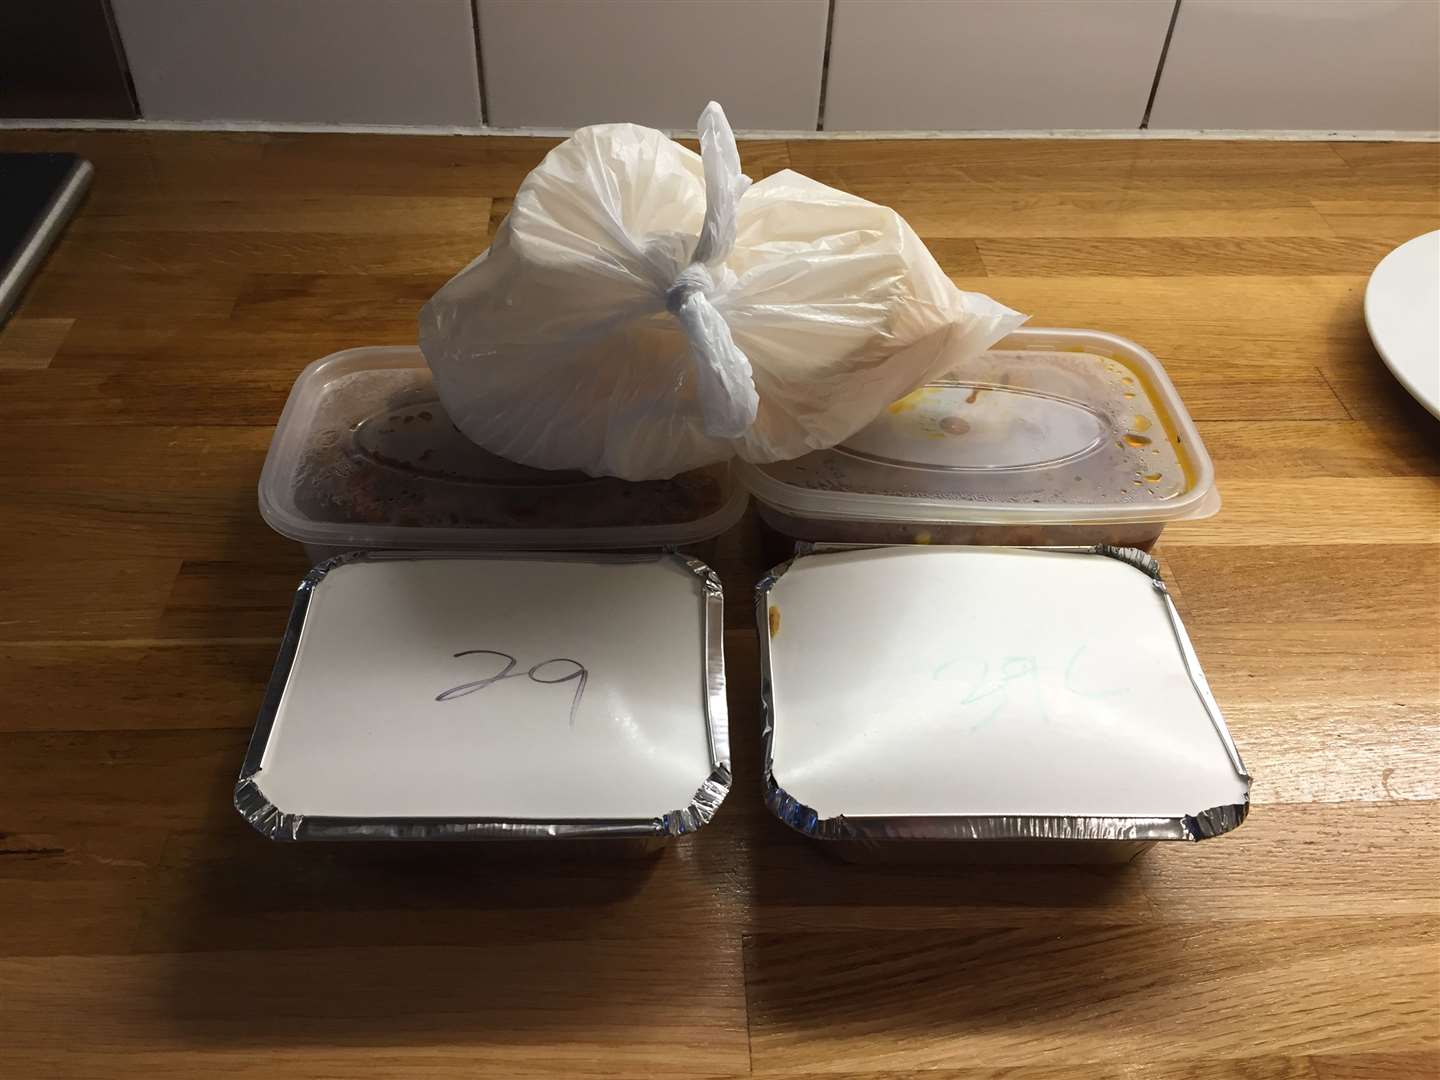 The takeaway from the Peking Express